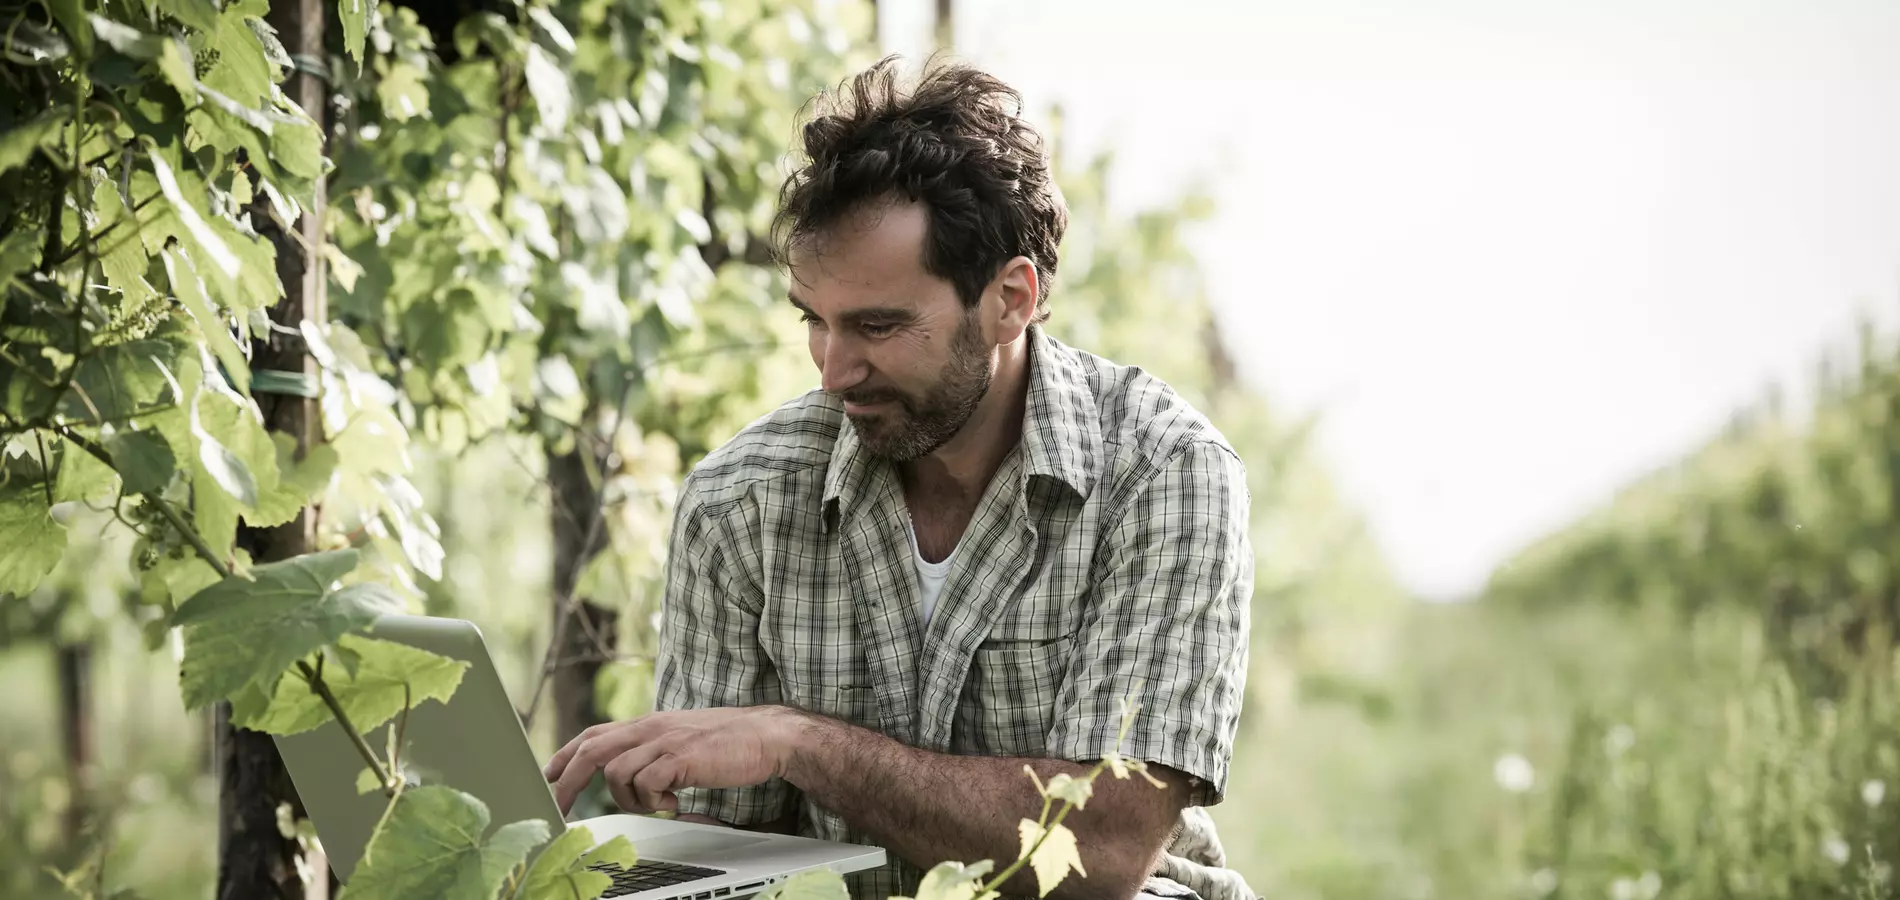 Man in the vineyard, looking at computer